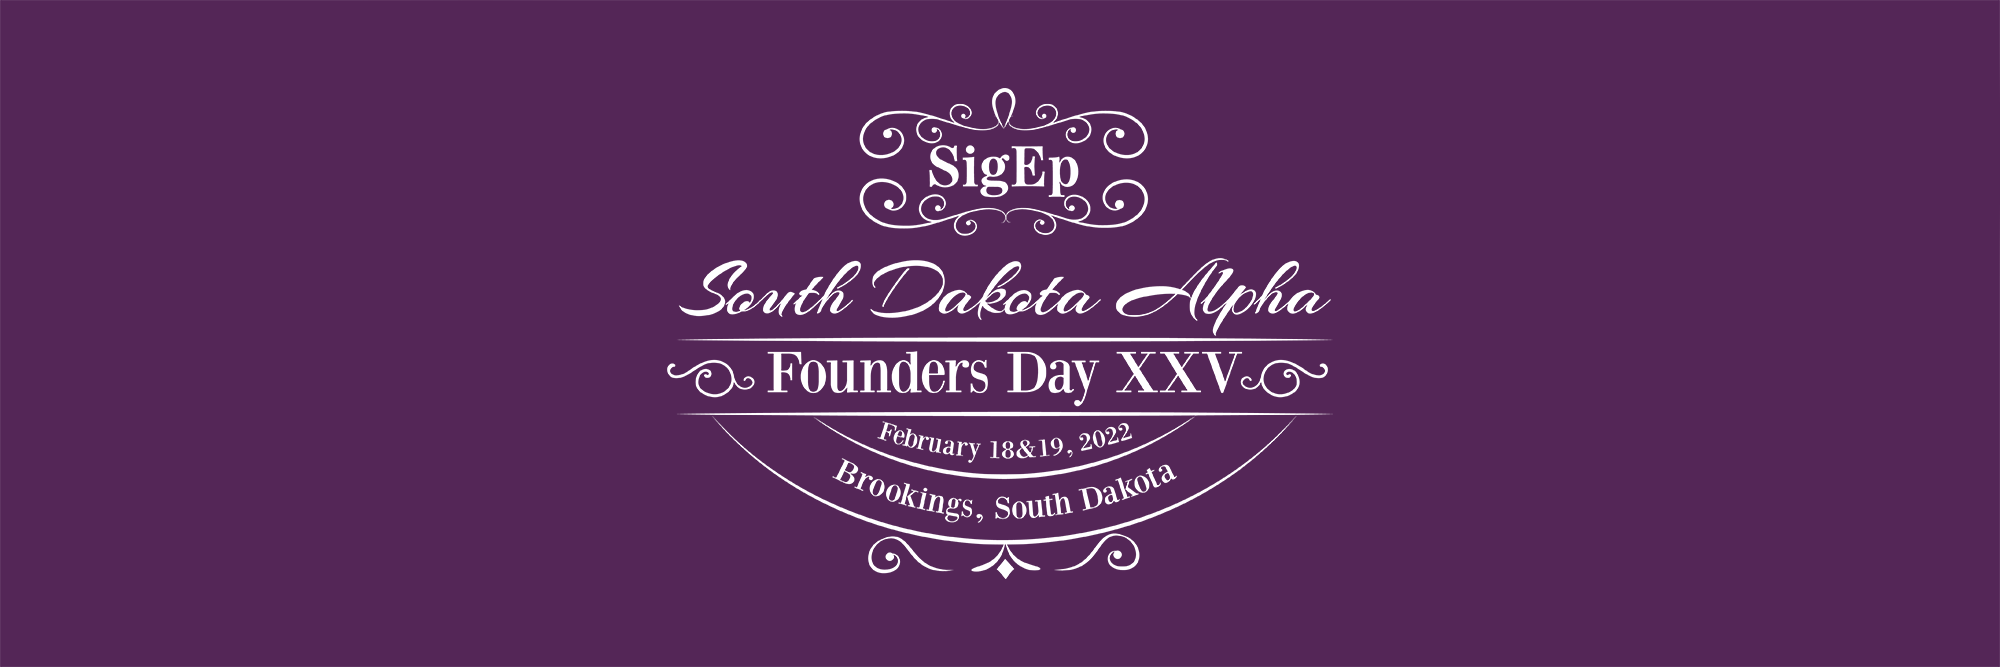 SigEp Founders Day XXV